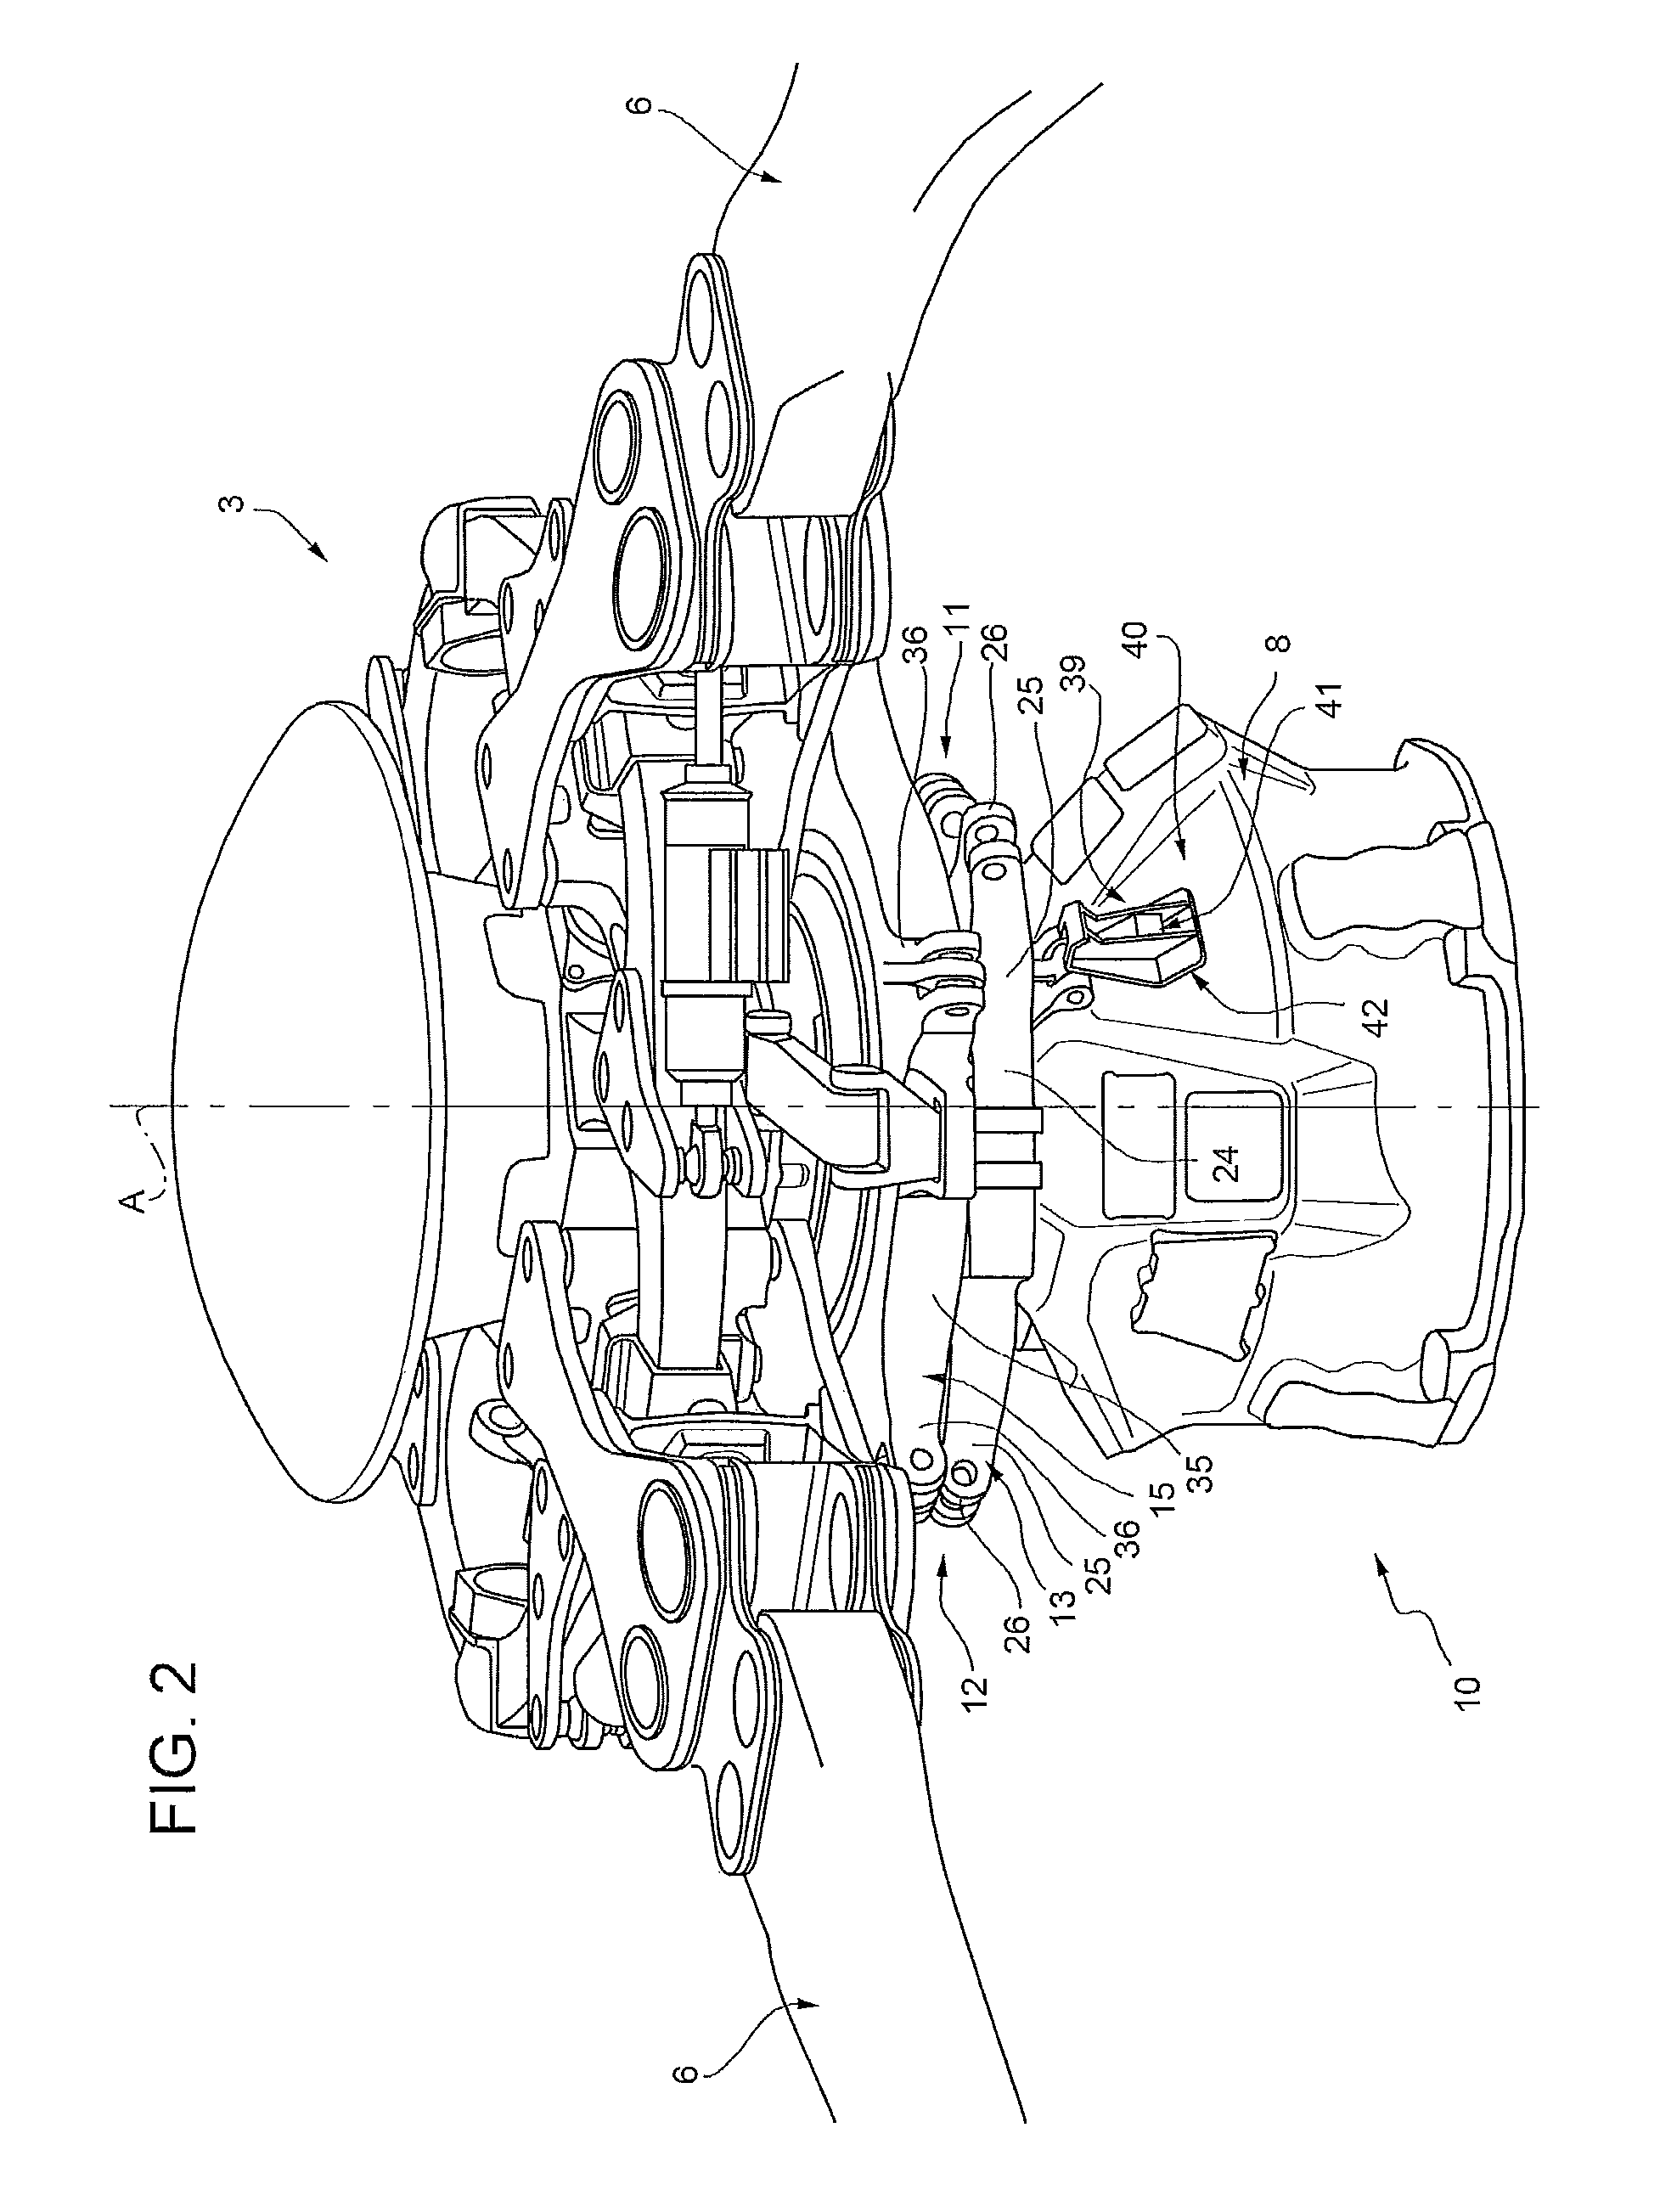 Rotor assembly for an aircraft capable of hovering and equipped with an improved constraint assembly